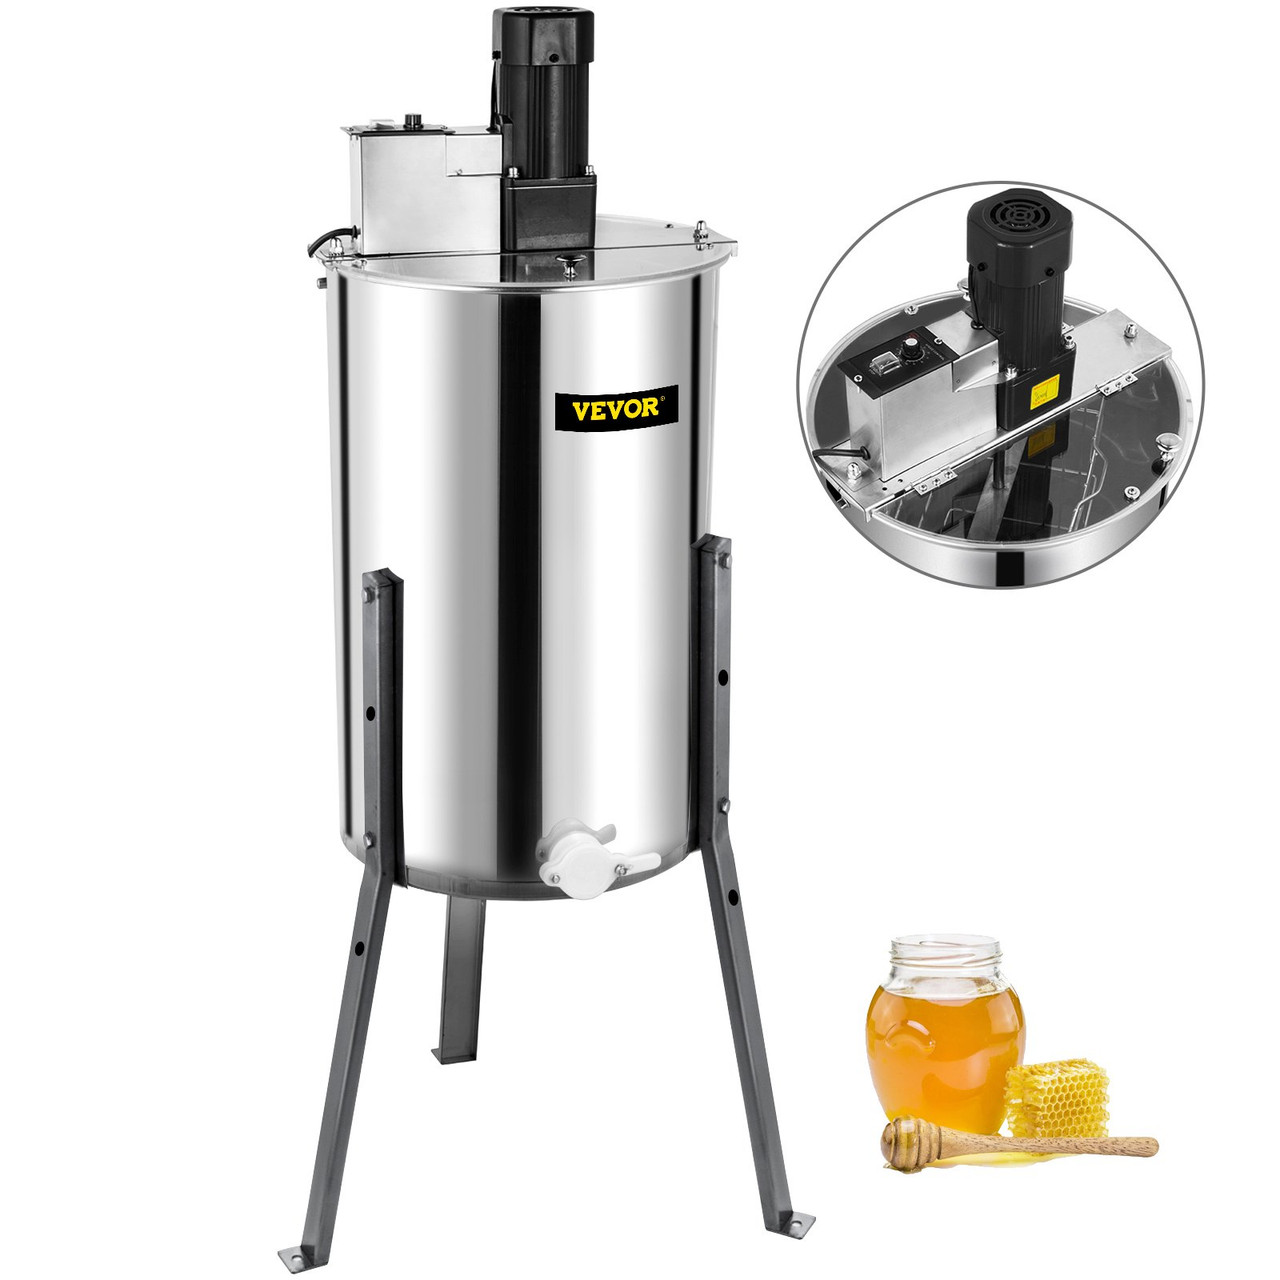 Electric Honey Extractor Separator 2 Frame Bee Extractor Stainless Steel Honeycomb Spinner Crank. Beekeeping Extraction Apiary Centrifuge Equipment